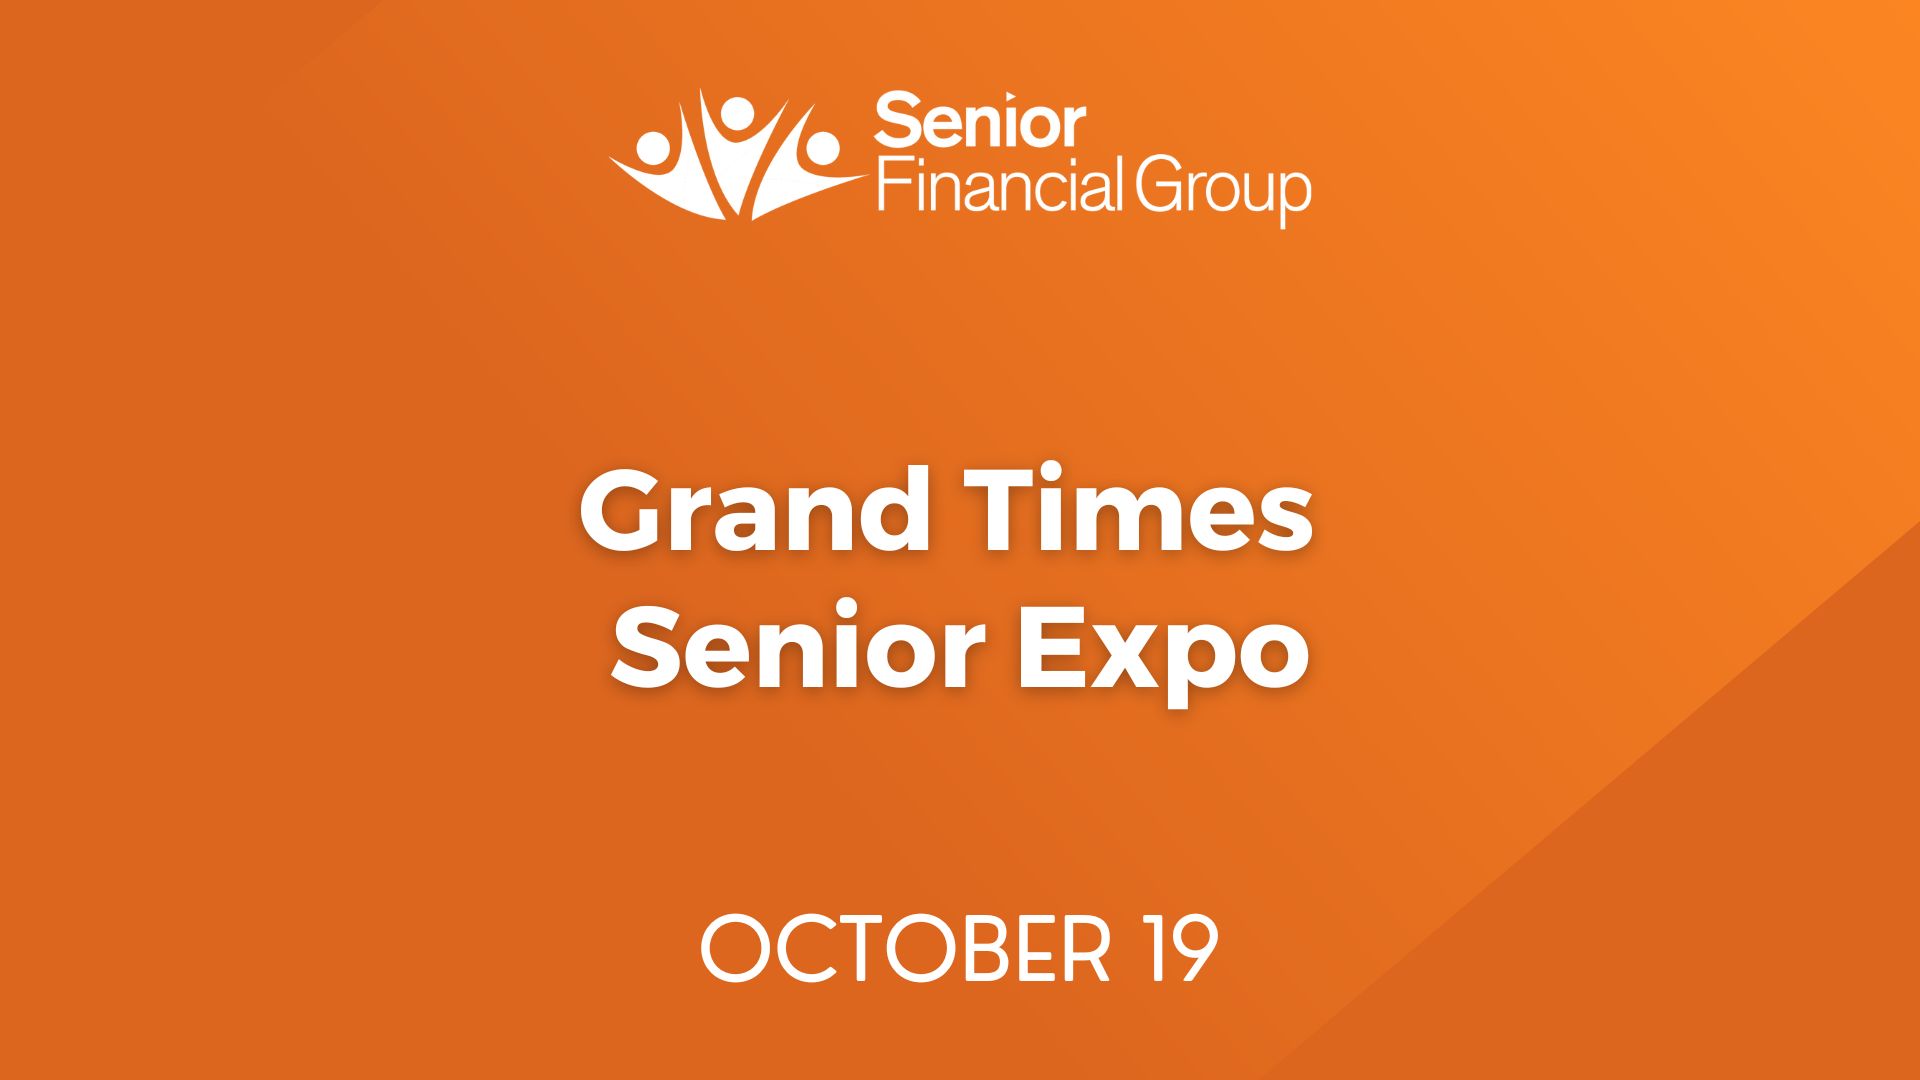 The Daily Times Senior Expo will take place on Thursday, October 19.